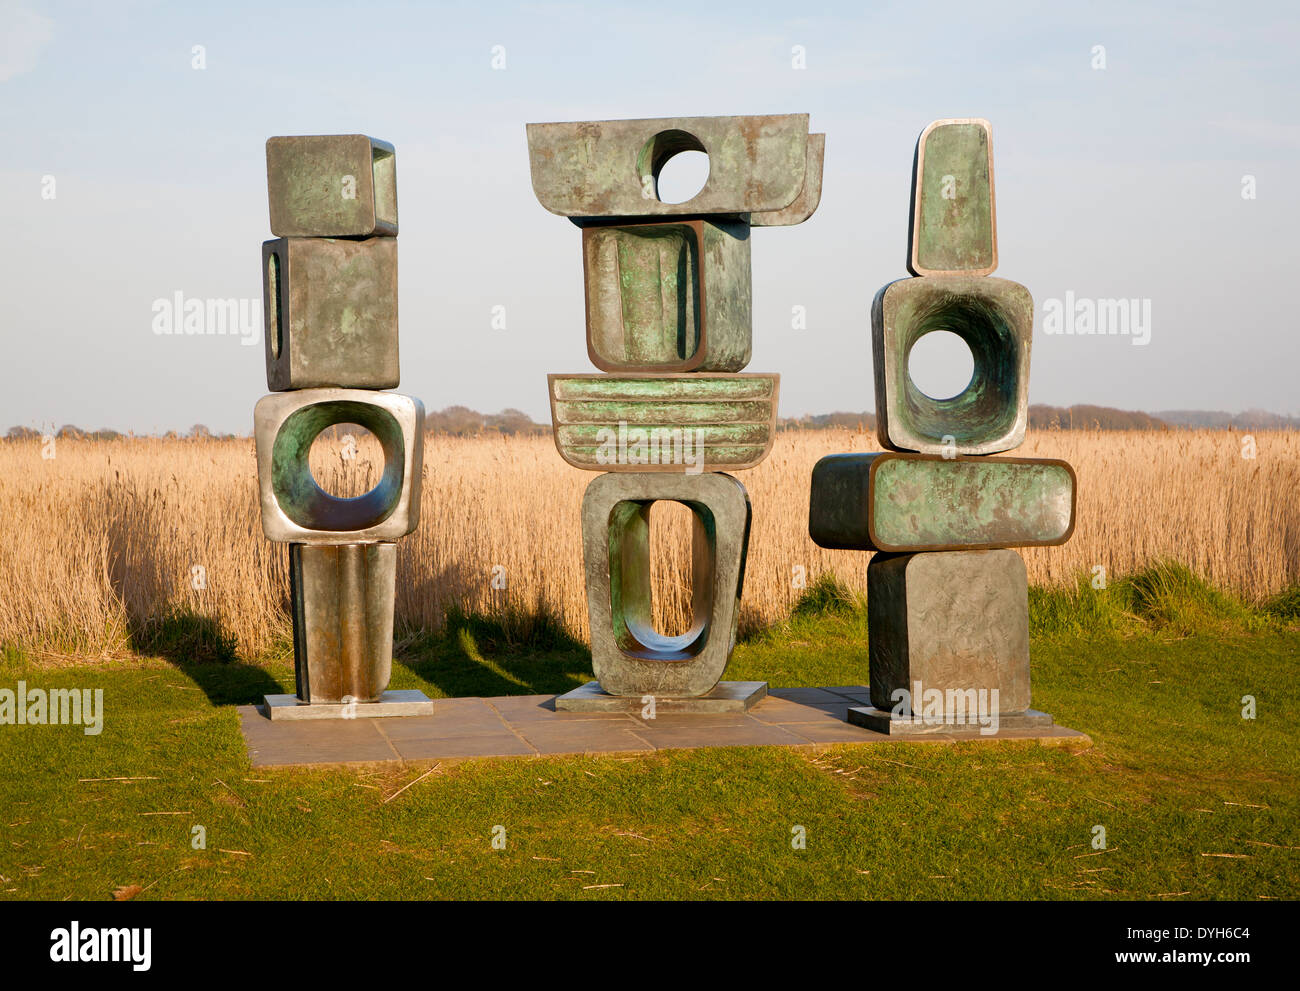 The Family of Man sculpture by Barbara Hepworth created in 1970 at Snape Maltings, Suffolk, England Stock Photo